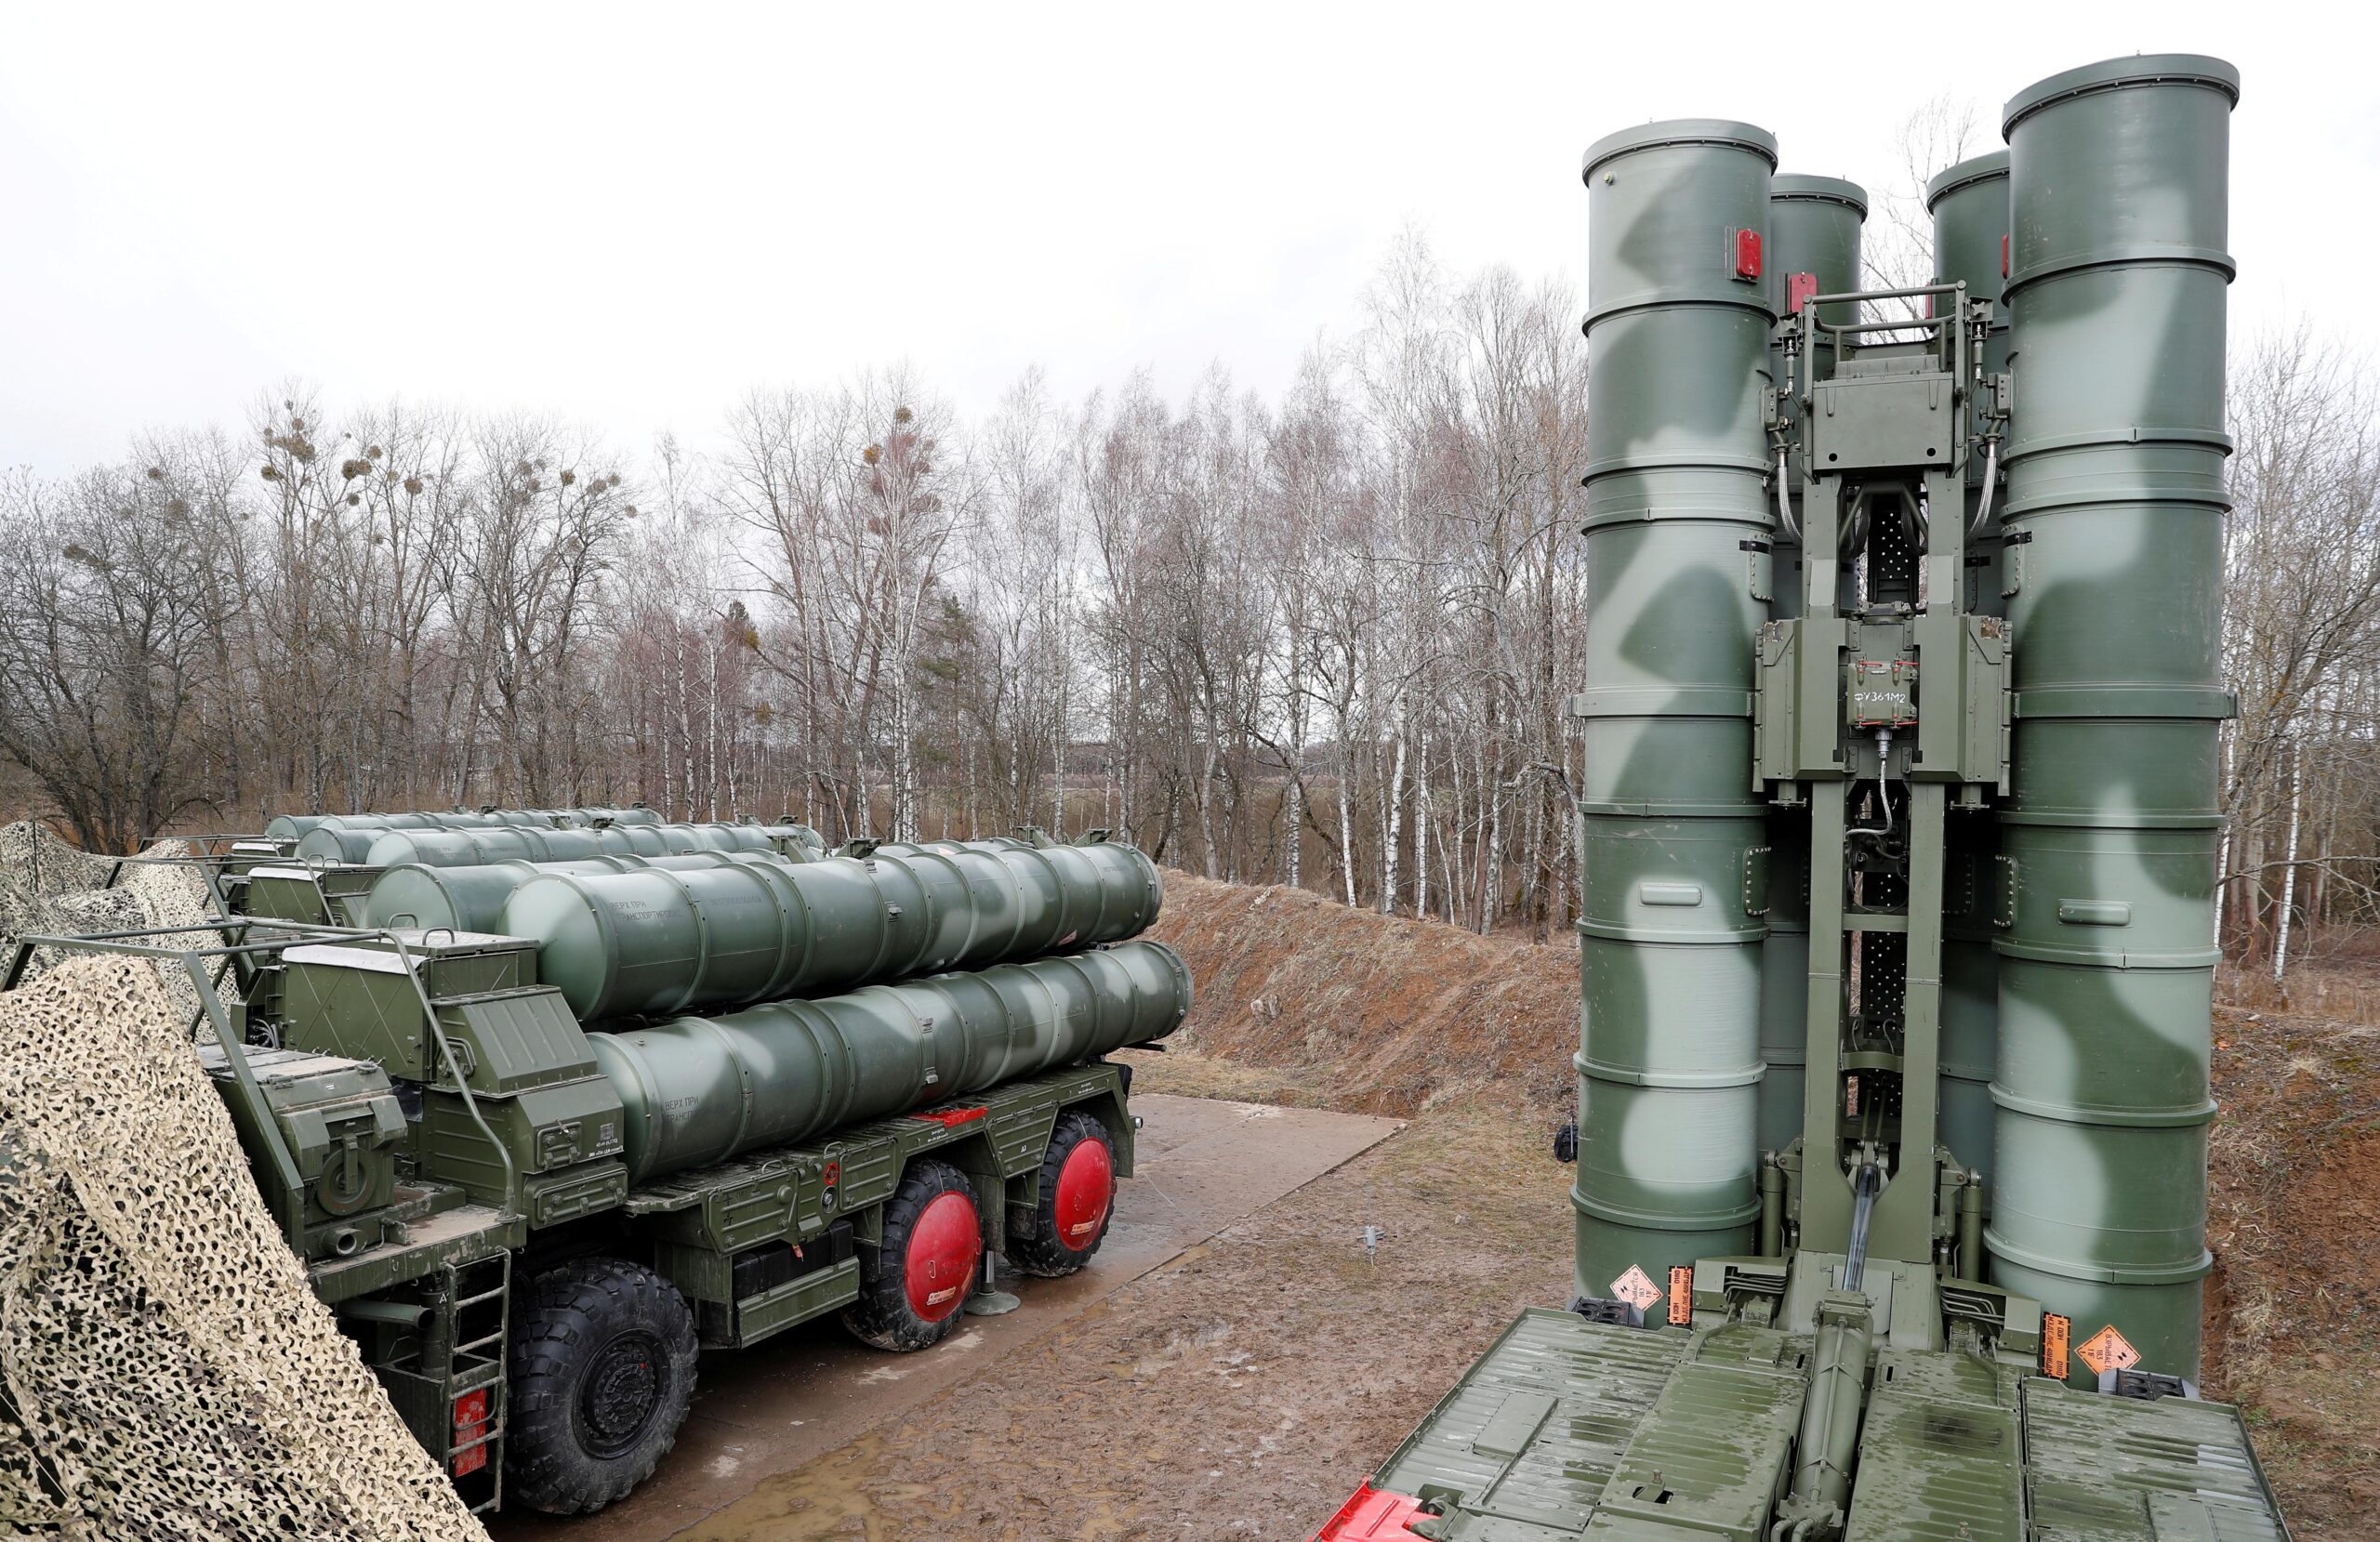 S-400 missile system to India